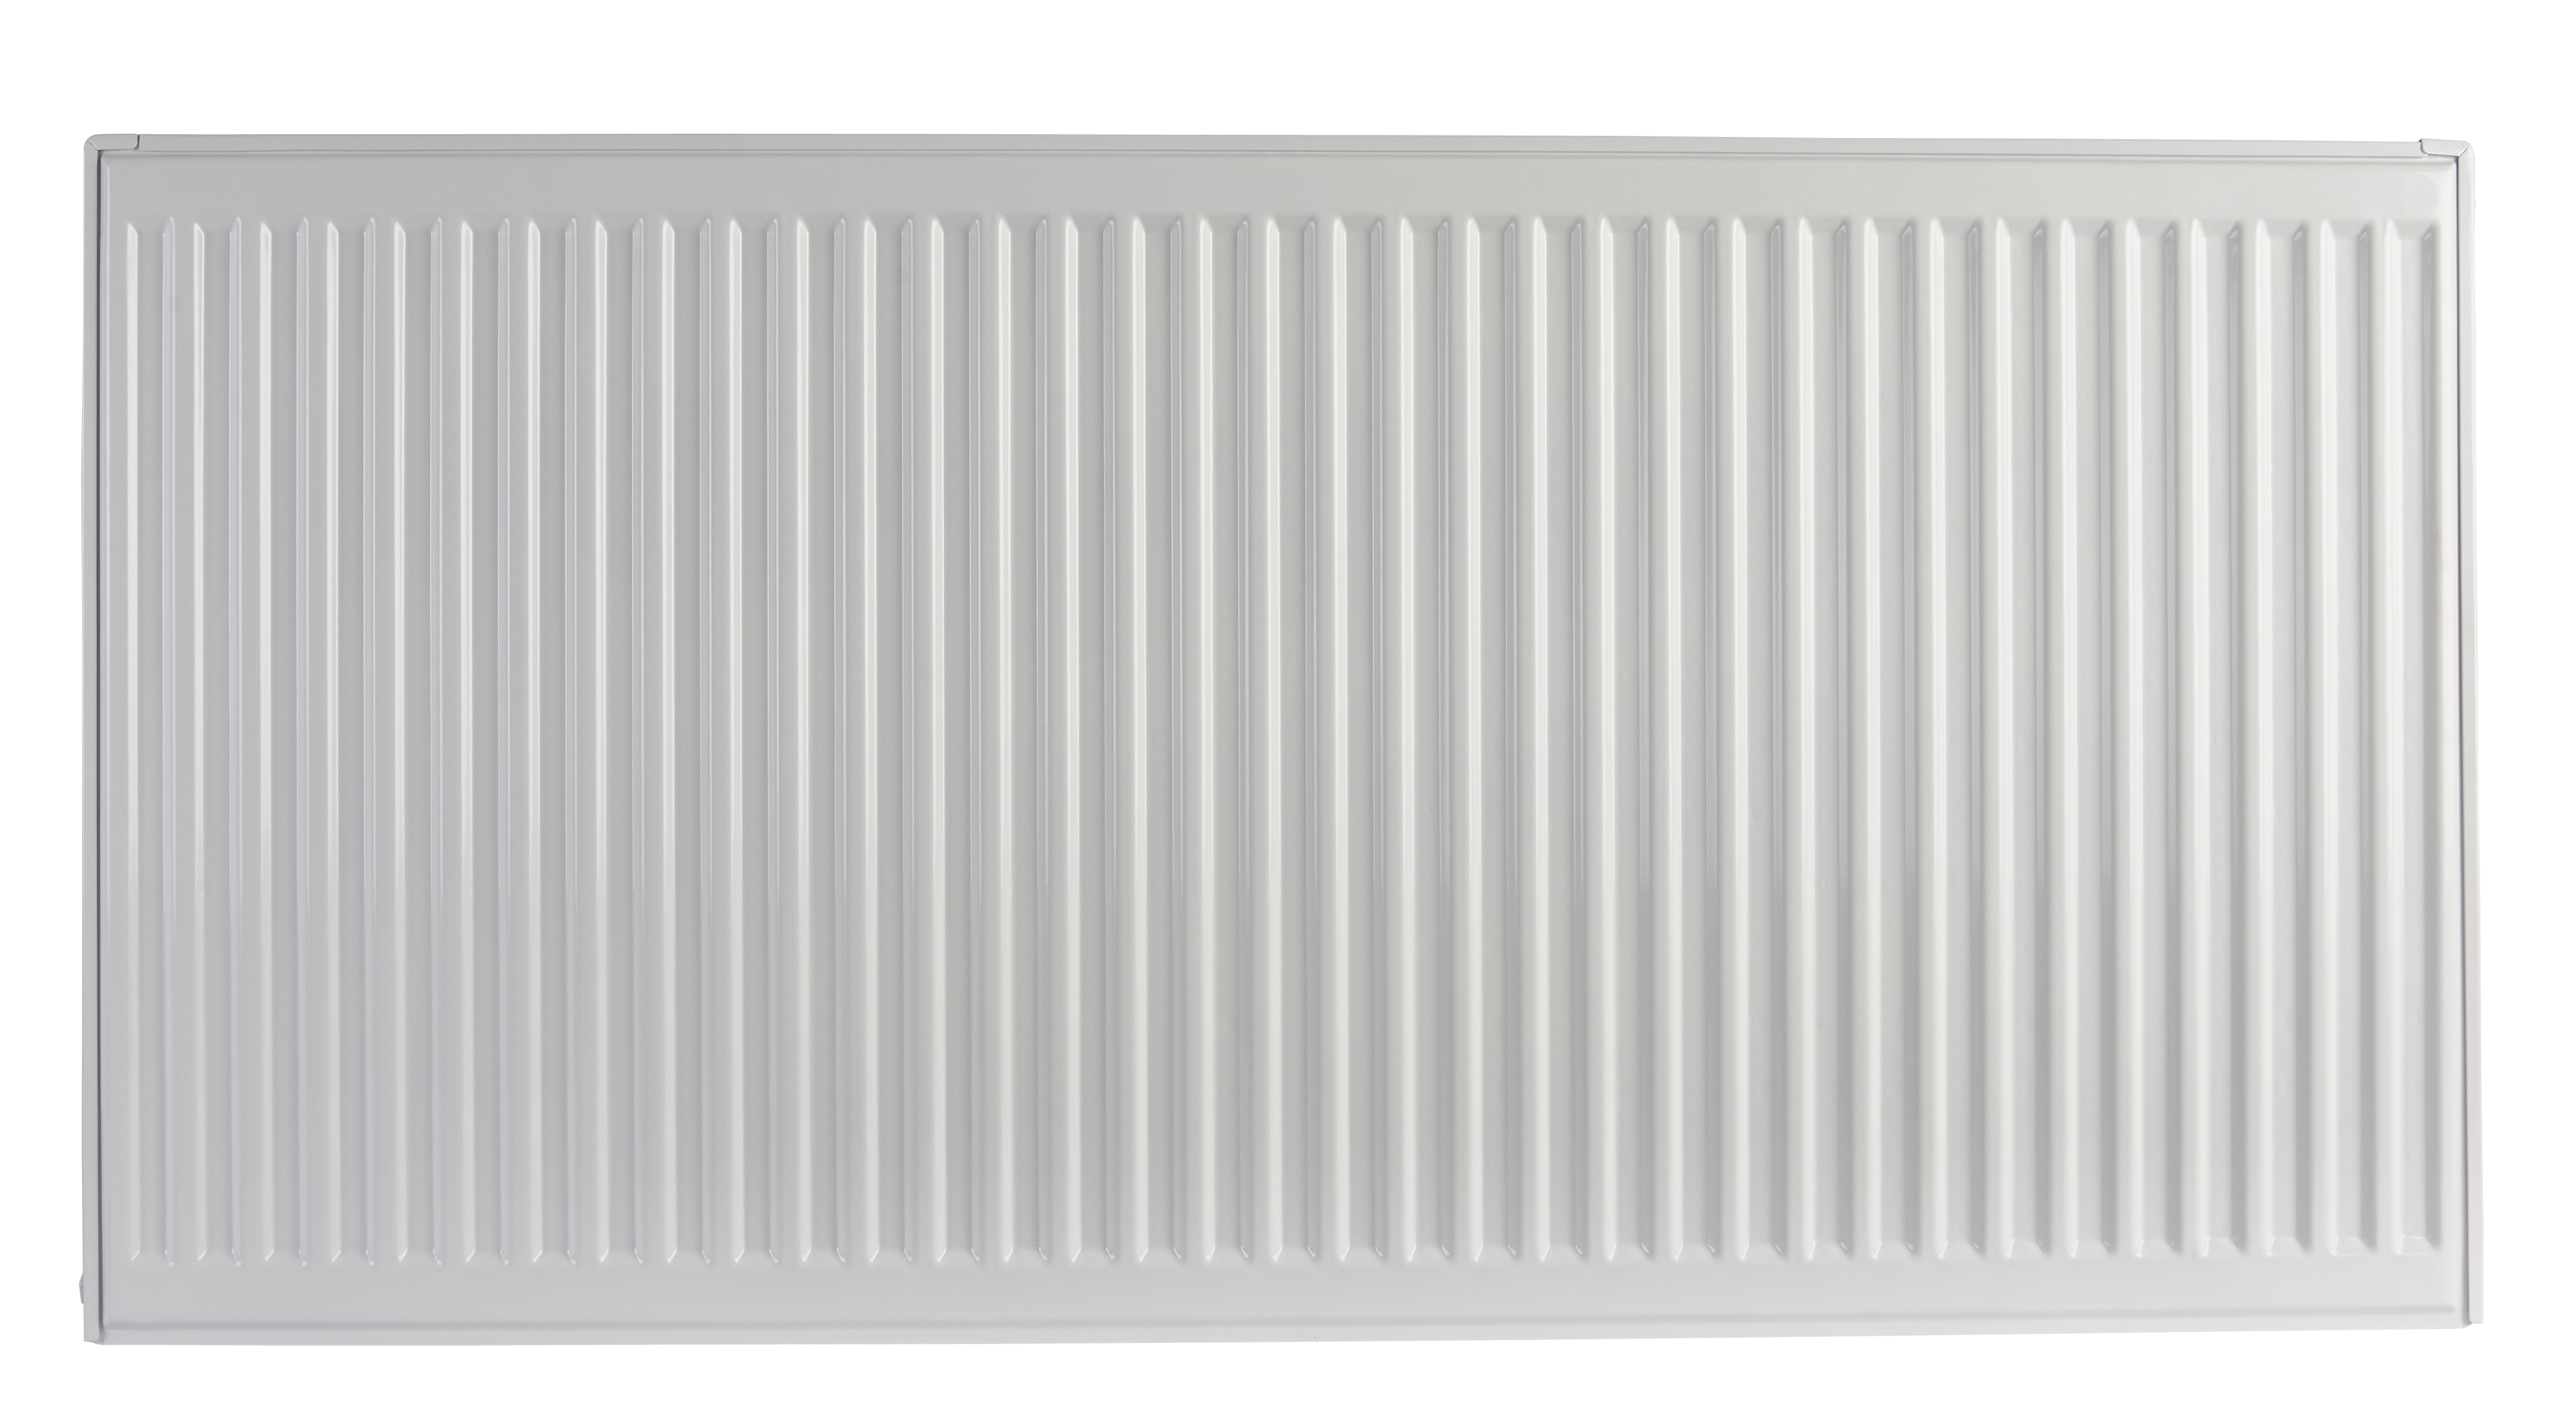 Homeline by Stelrad Type 21 Double Panel Plus Single Convector Radiator - 400 x 800mm